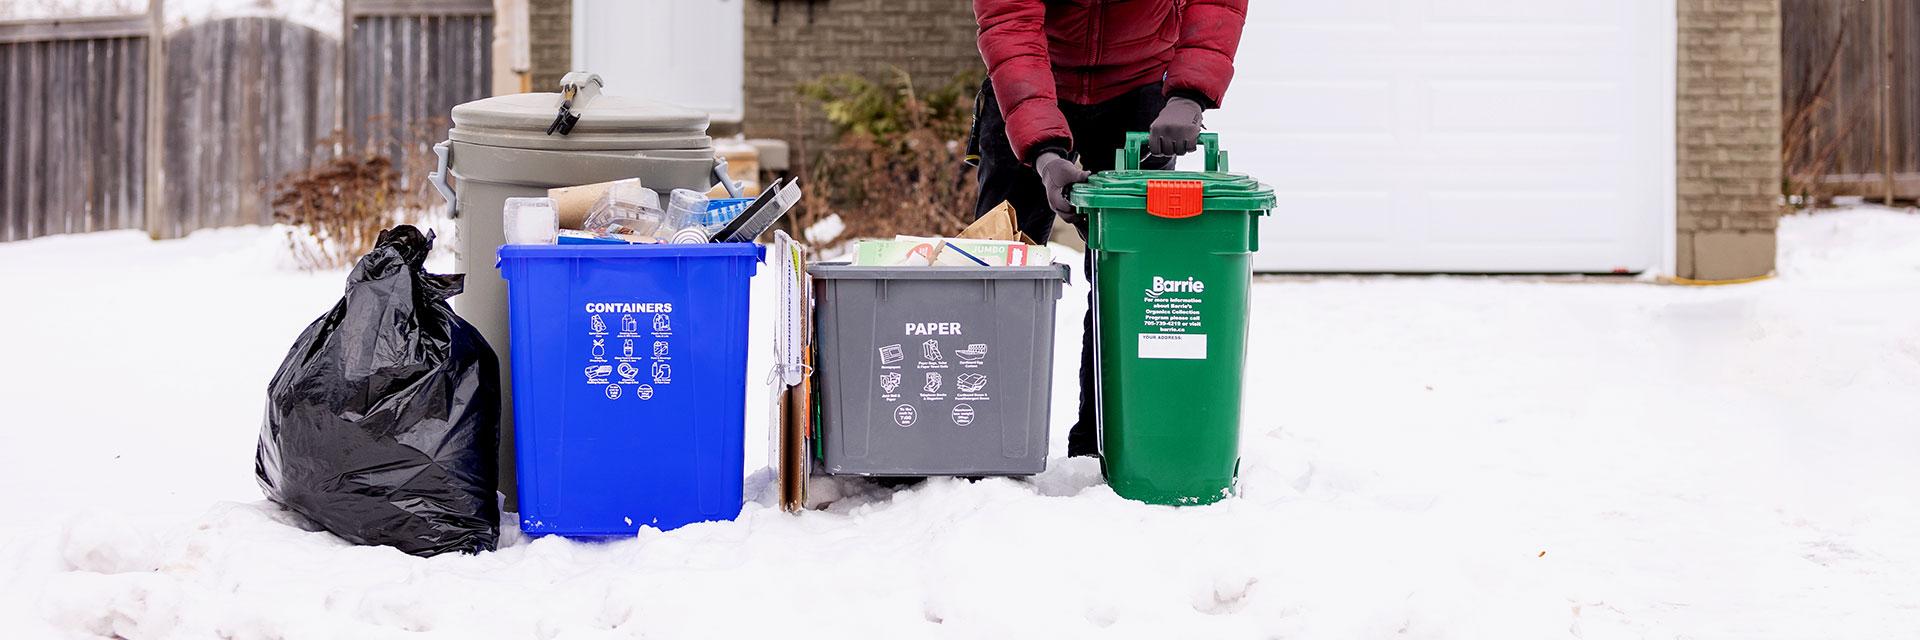 Barrie waste collection bins at the curb